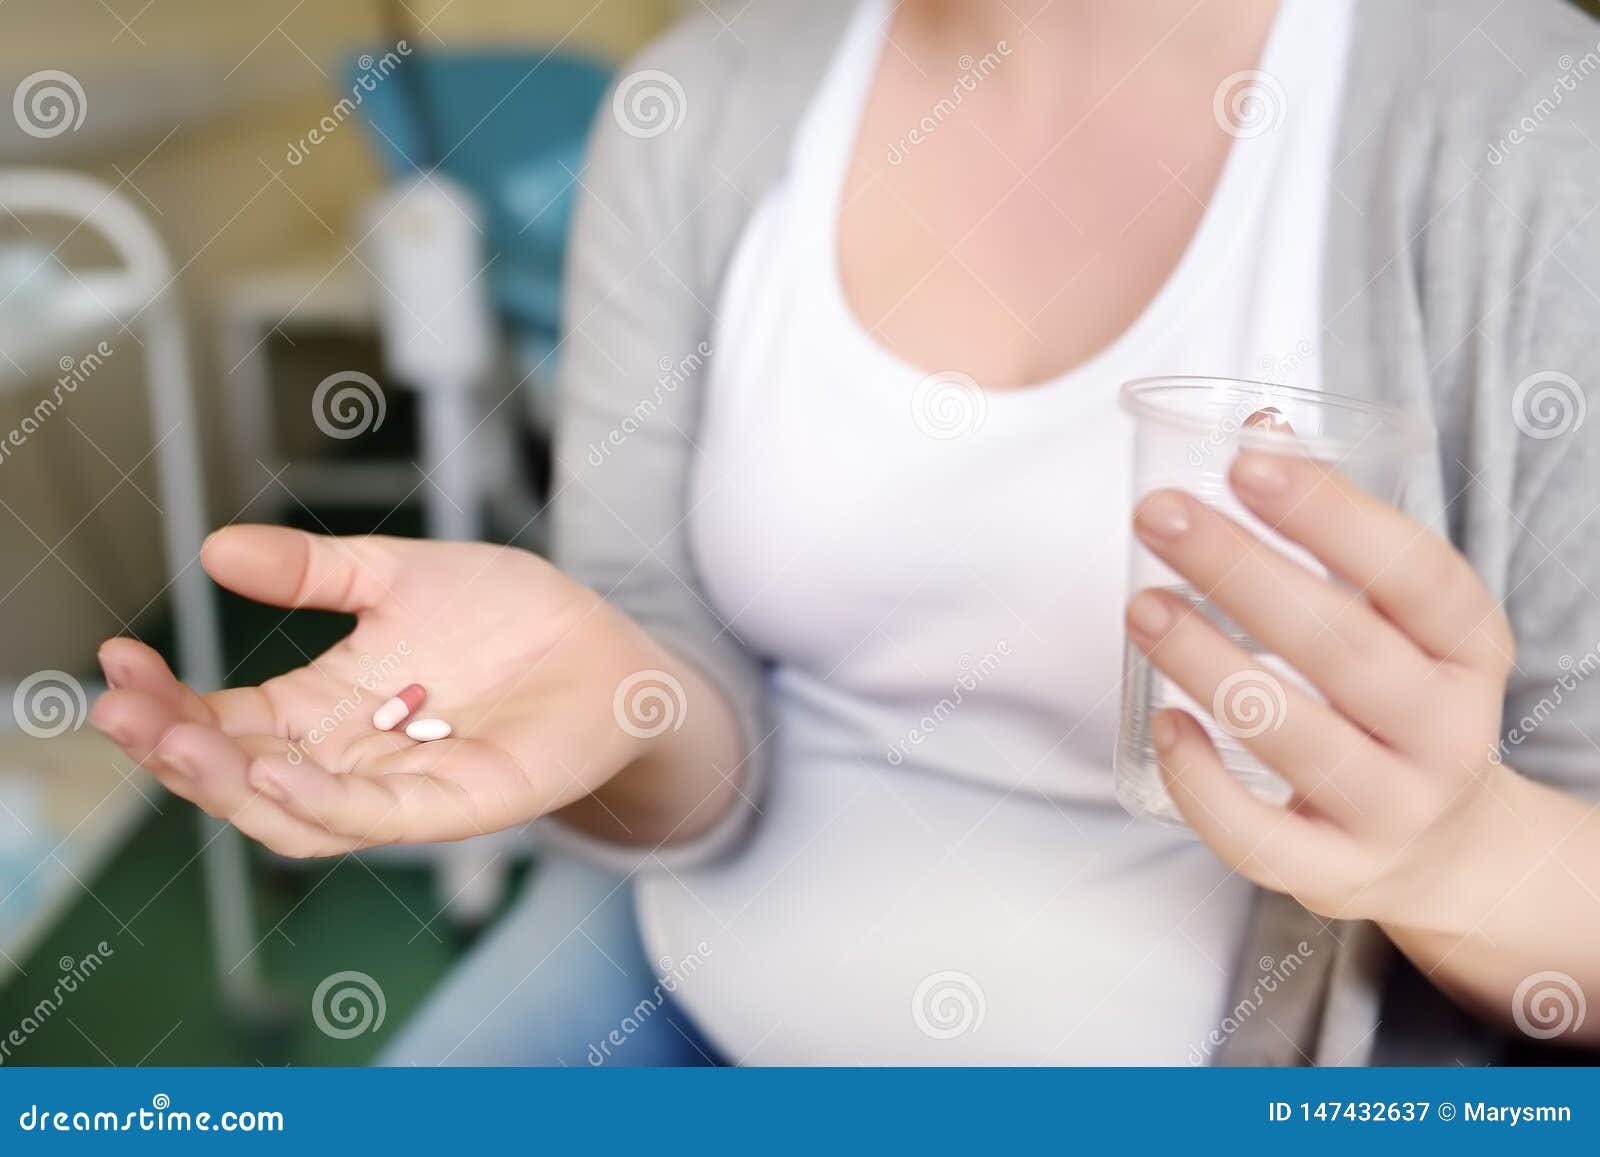 Pregnant Woman Taking A Pills. Medical Insurance ...